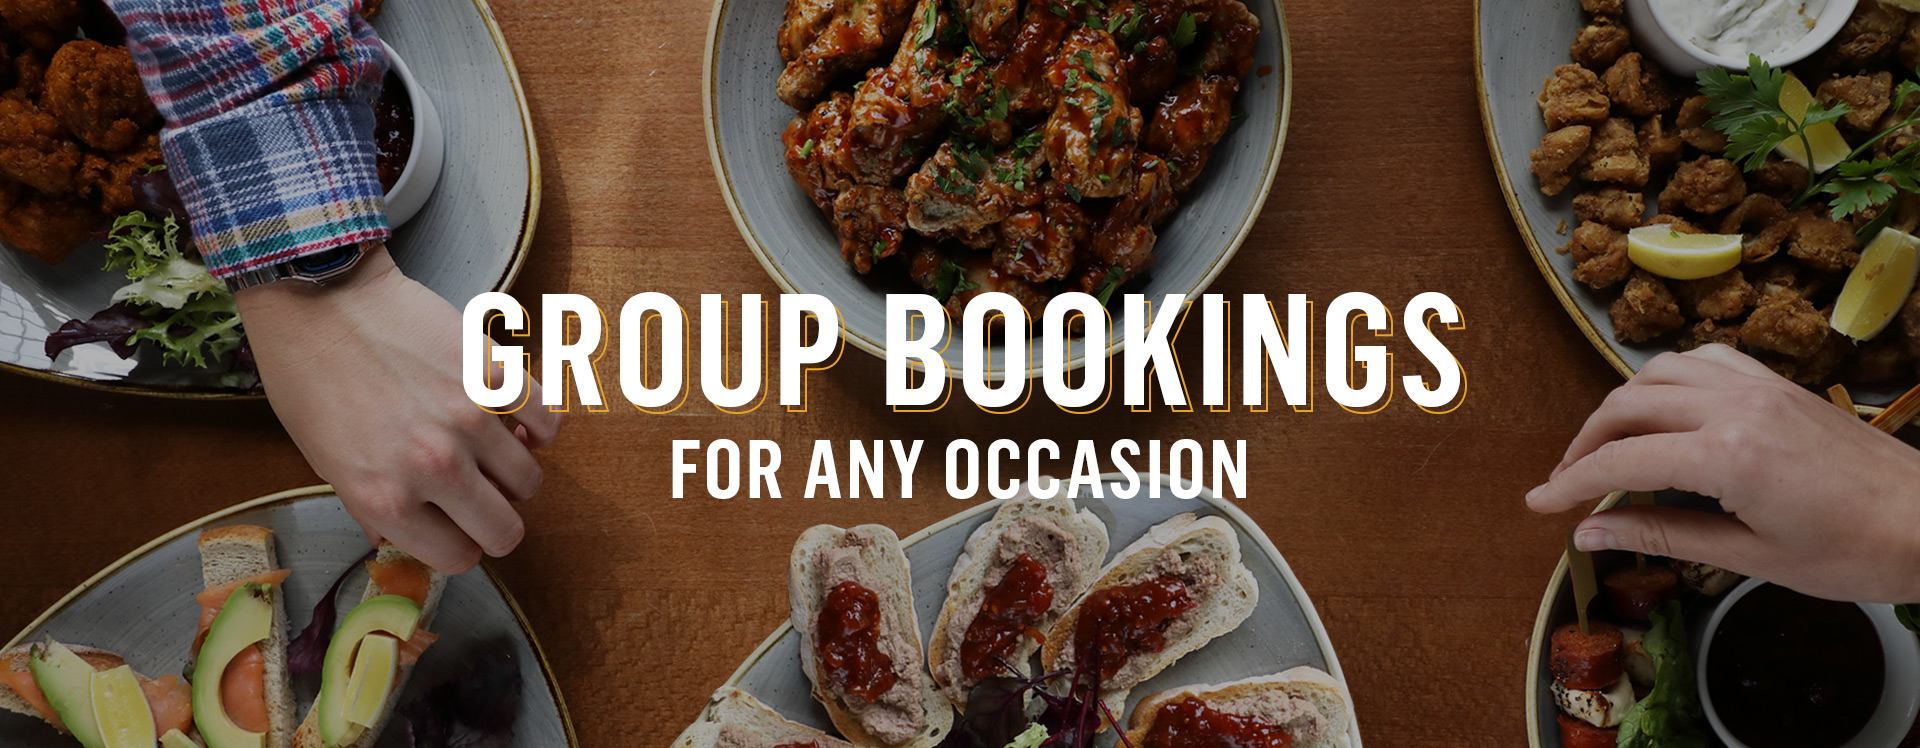 Group Bookings at The Lord Aberconway